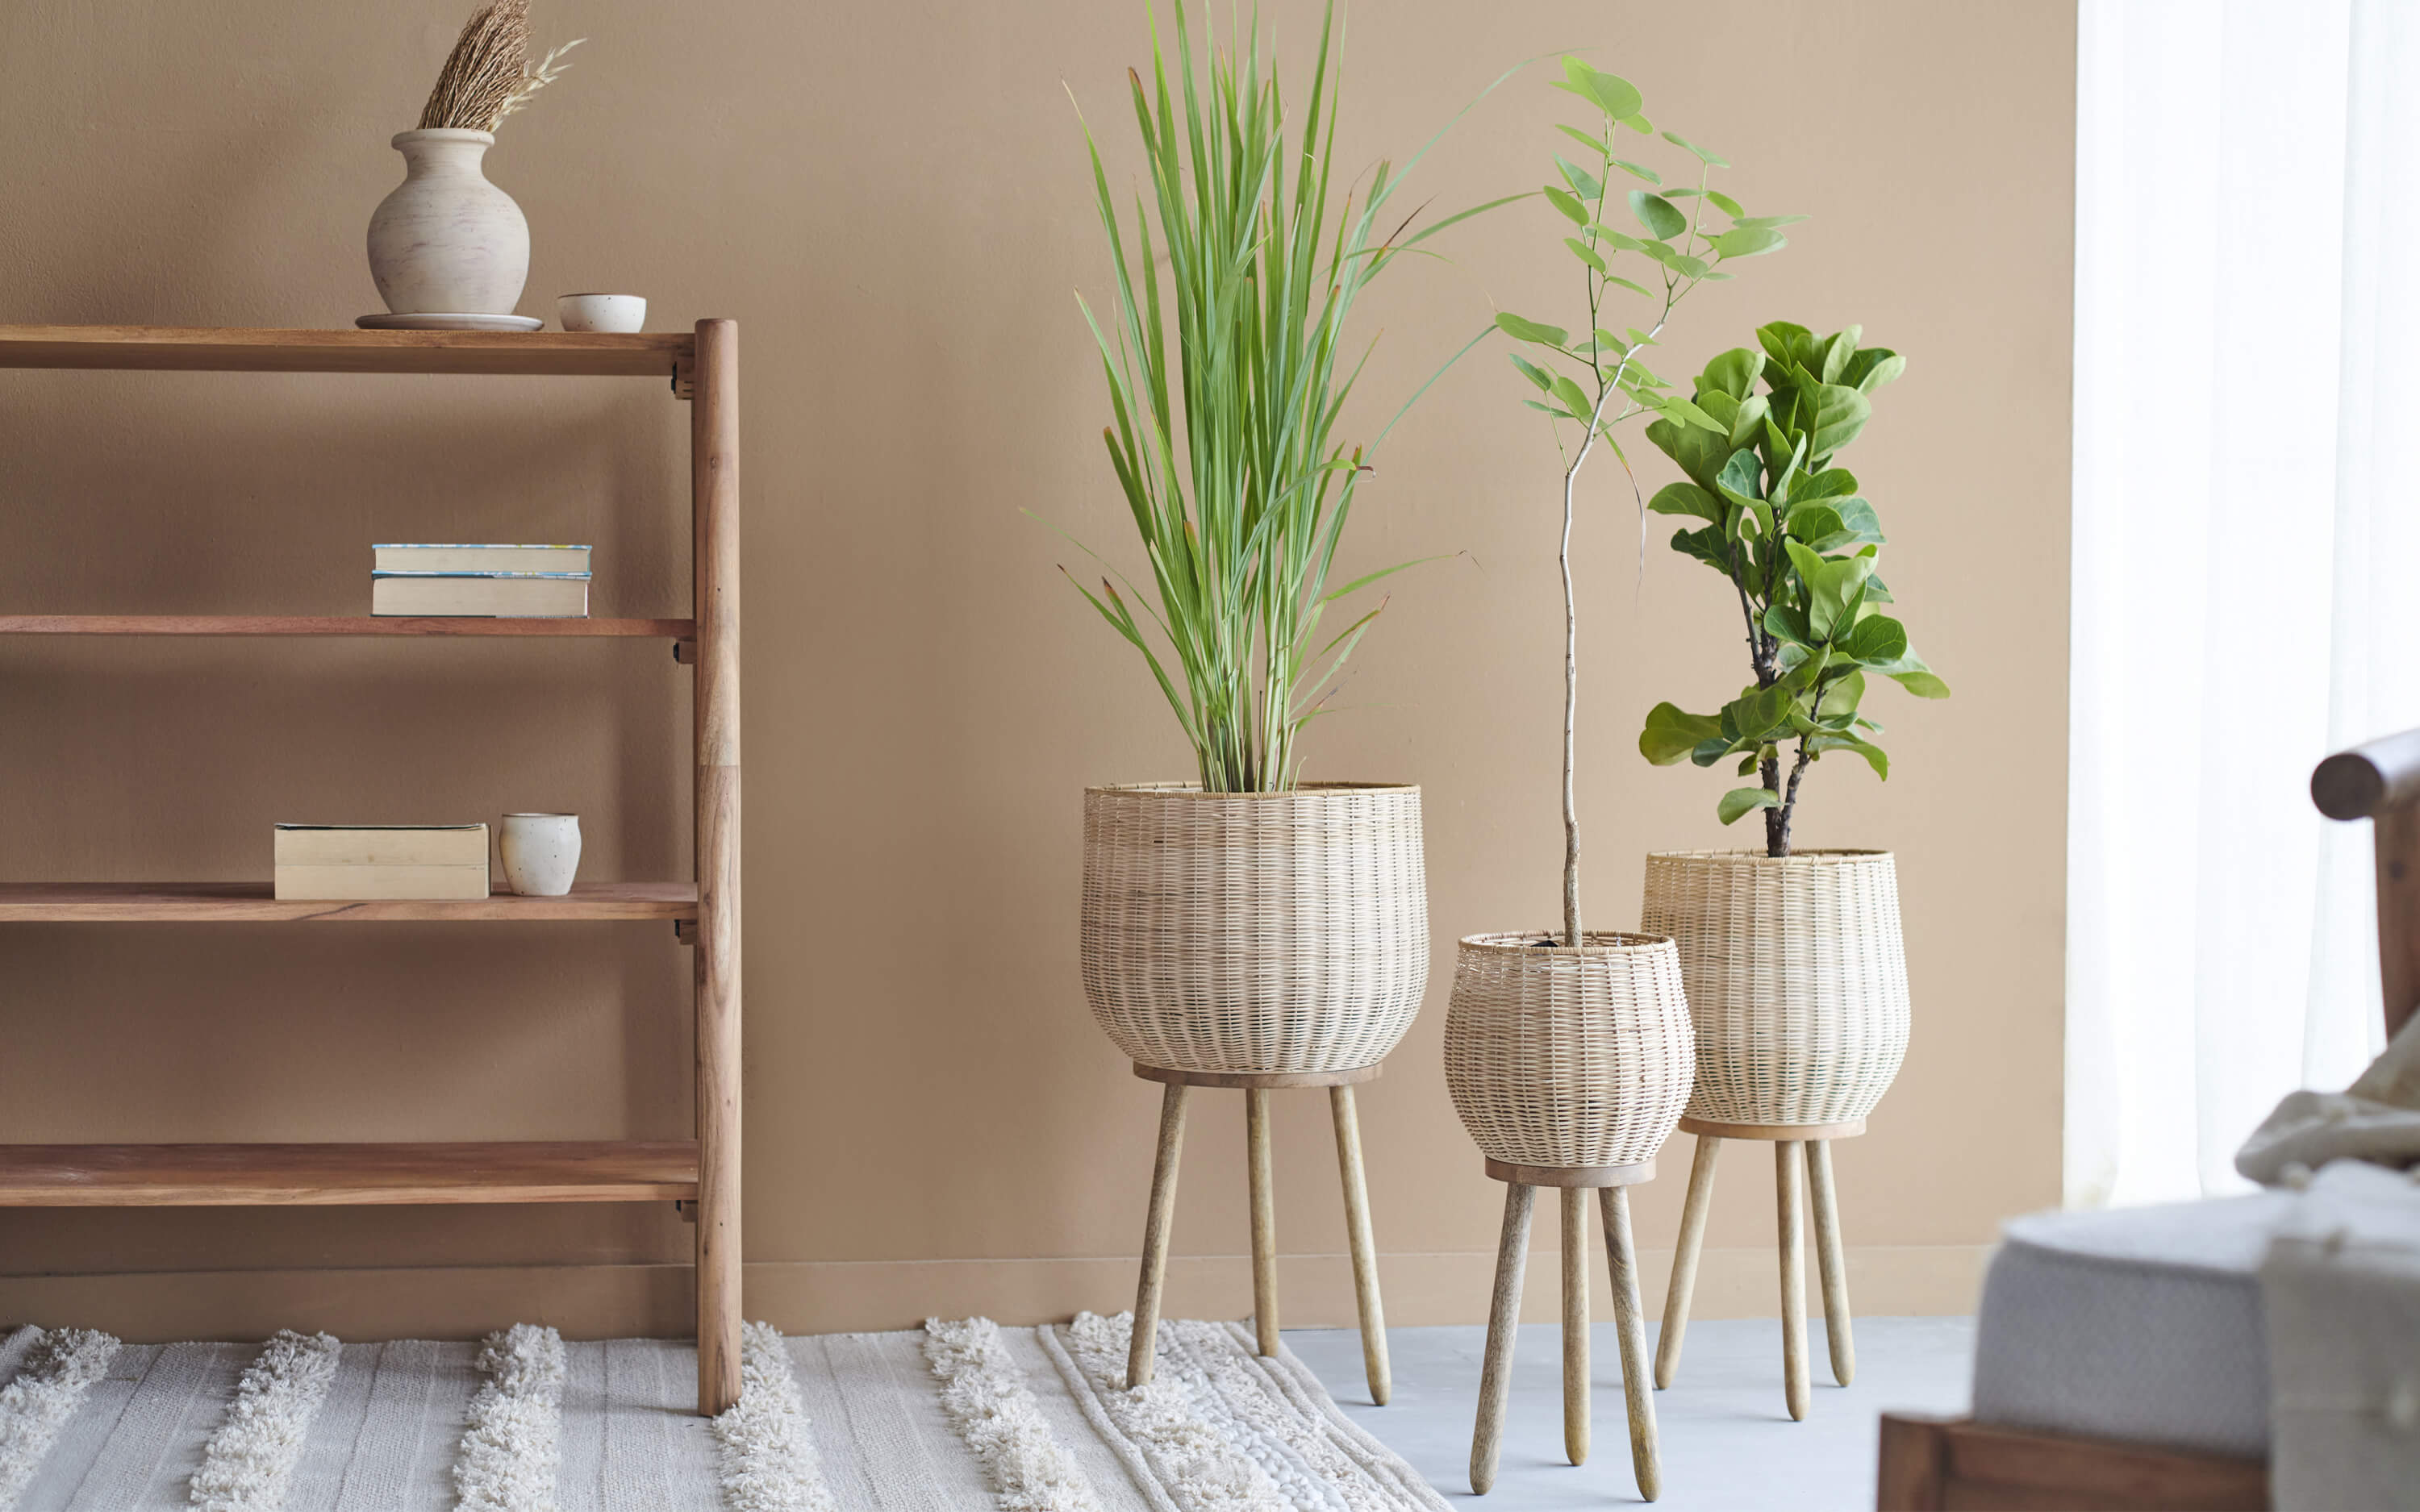 Aesthetic Planter - Greenery as a Decor Element